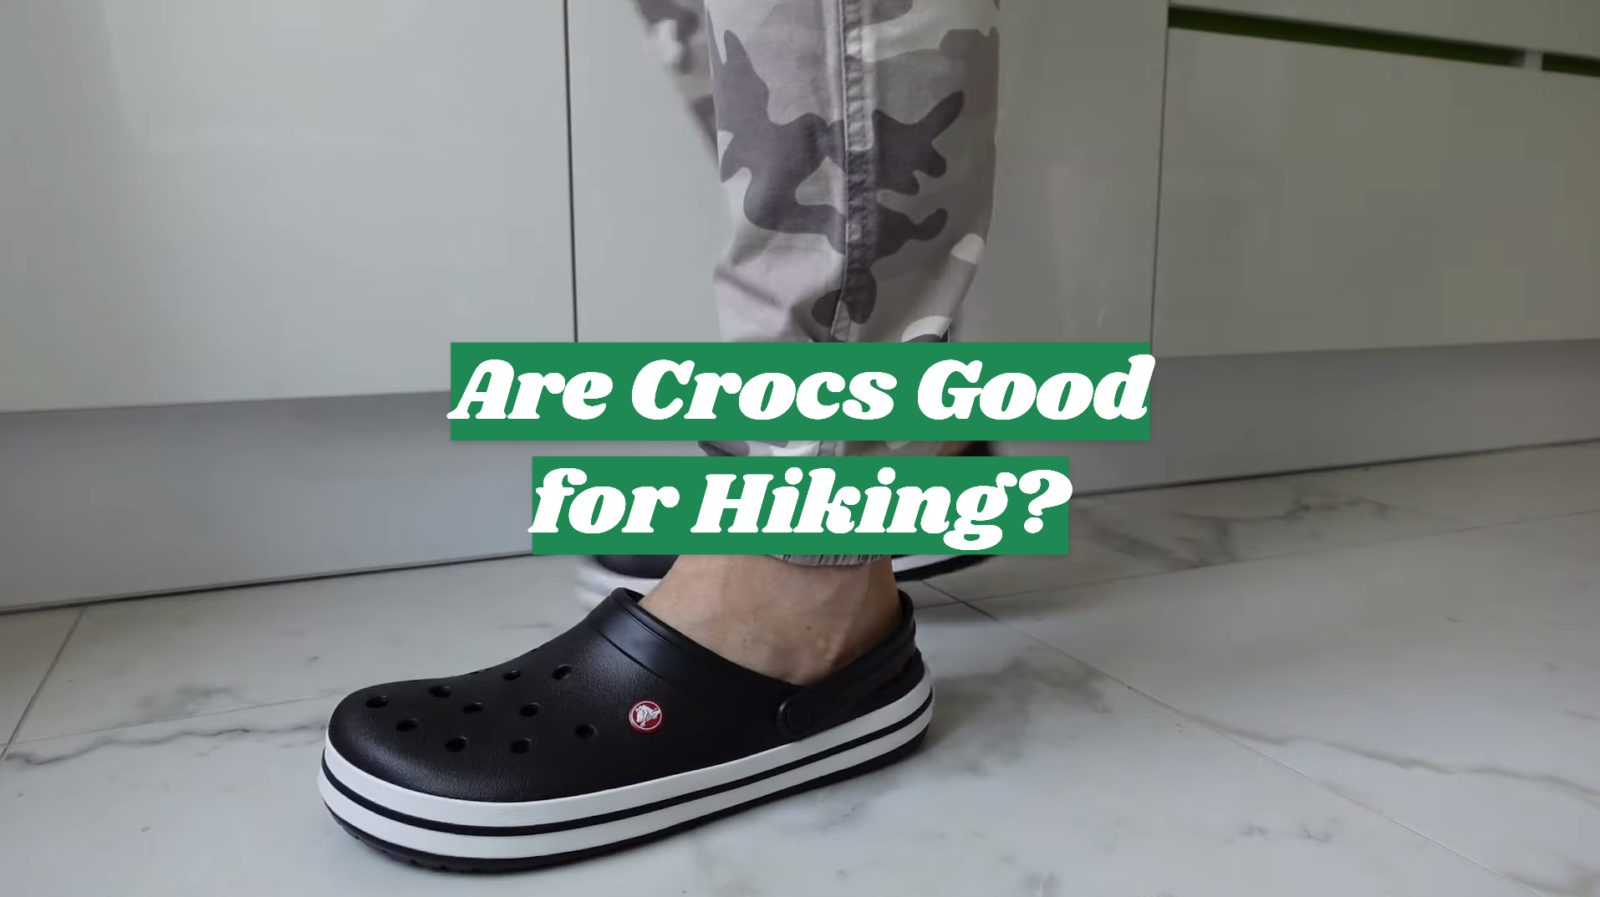 Are Crocs Good for Hiking?